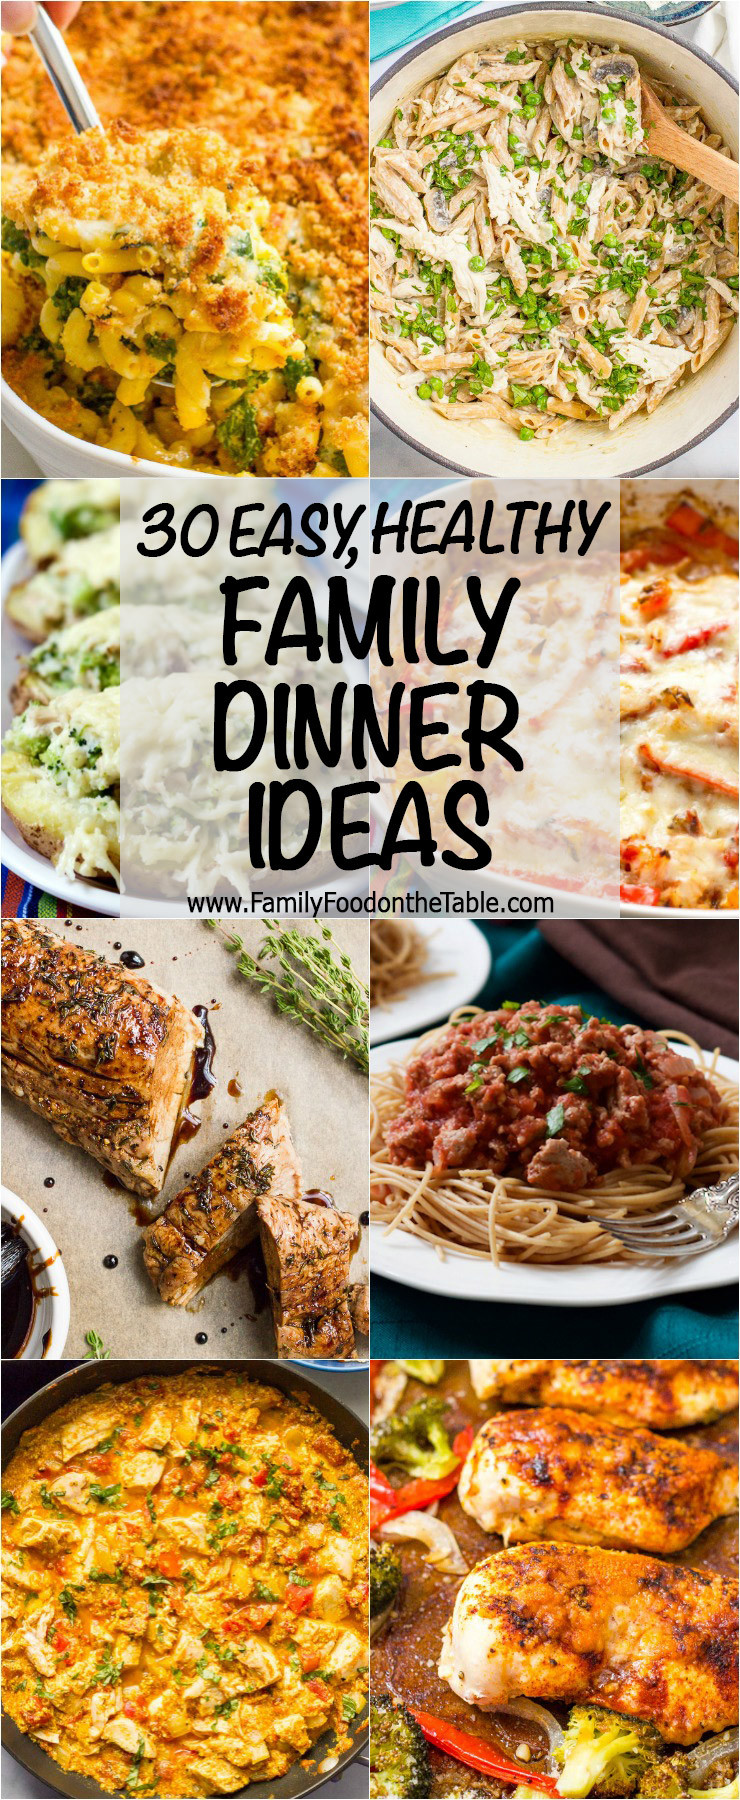 Easy And Healthy Dinner Recipes
 30 easy healthy family dinner ideas Family Food on the Table